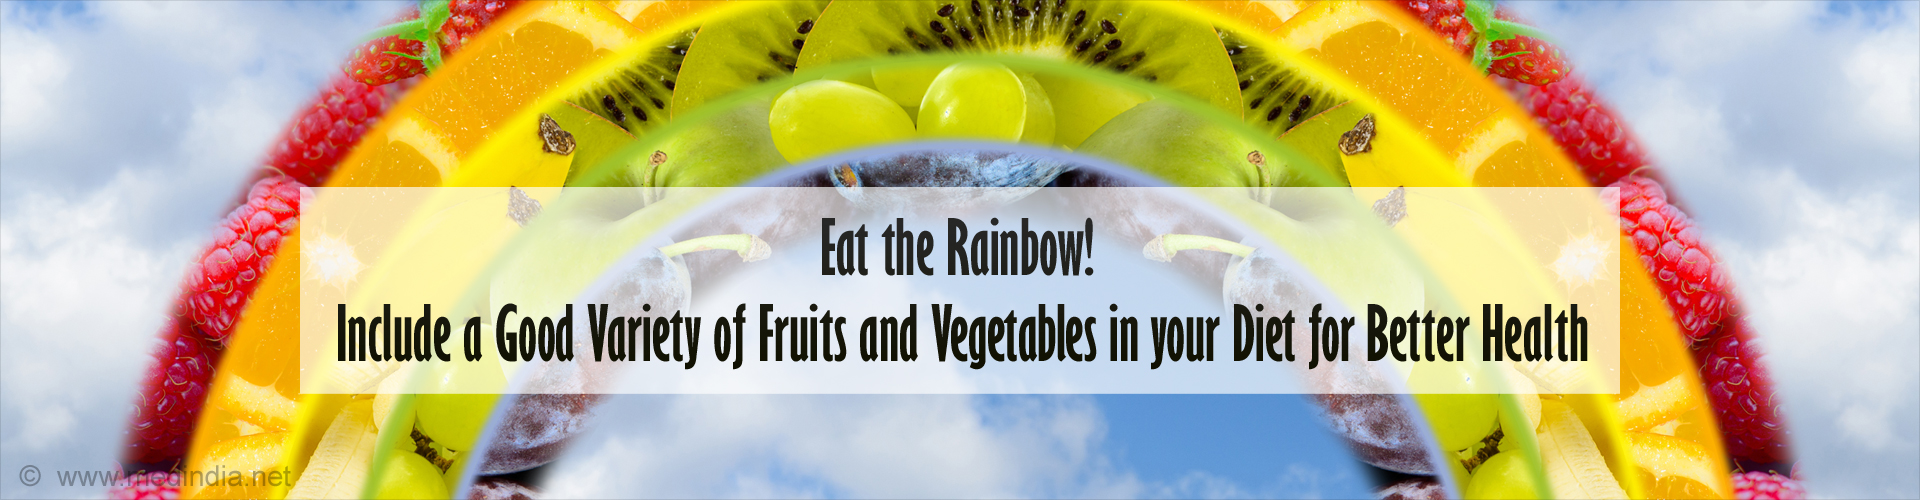 Eat the Rainbow! Include a Good Variety of Fruits and Vegetables in your Diet for Better Health